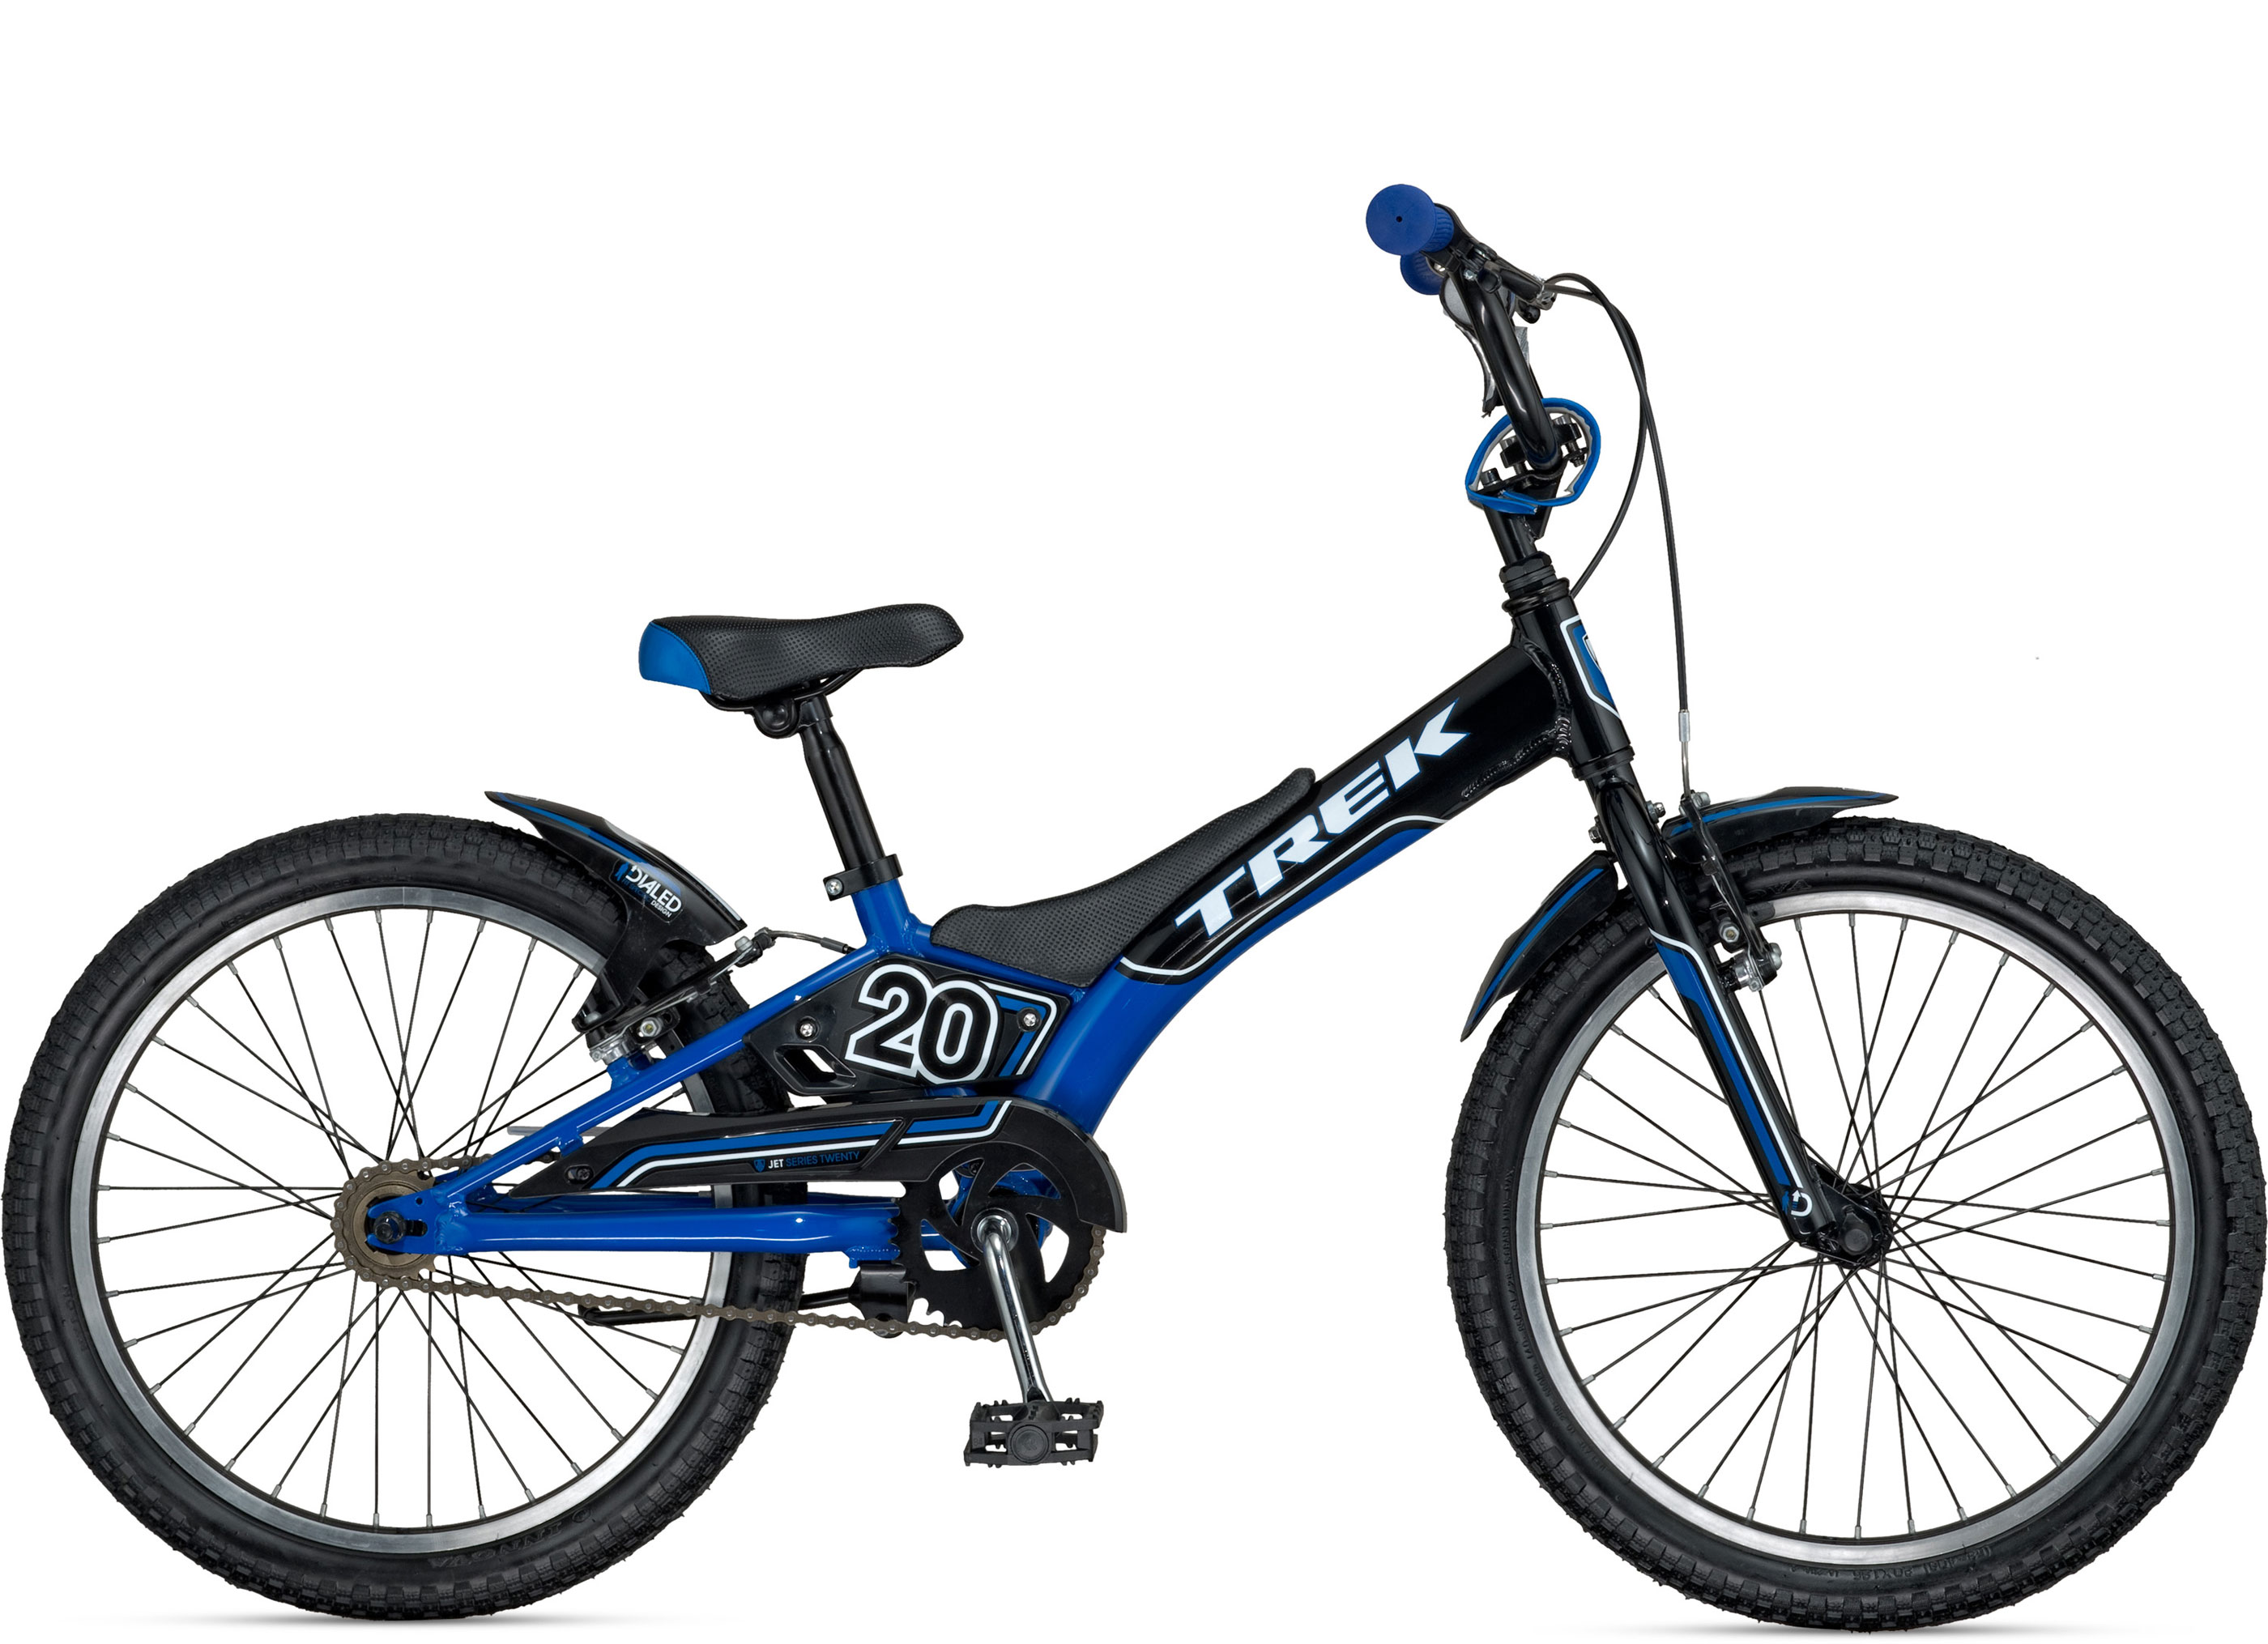 2012 Jet 20 E | Bouticycle